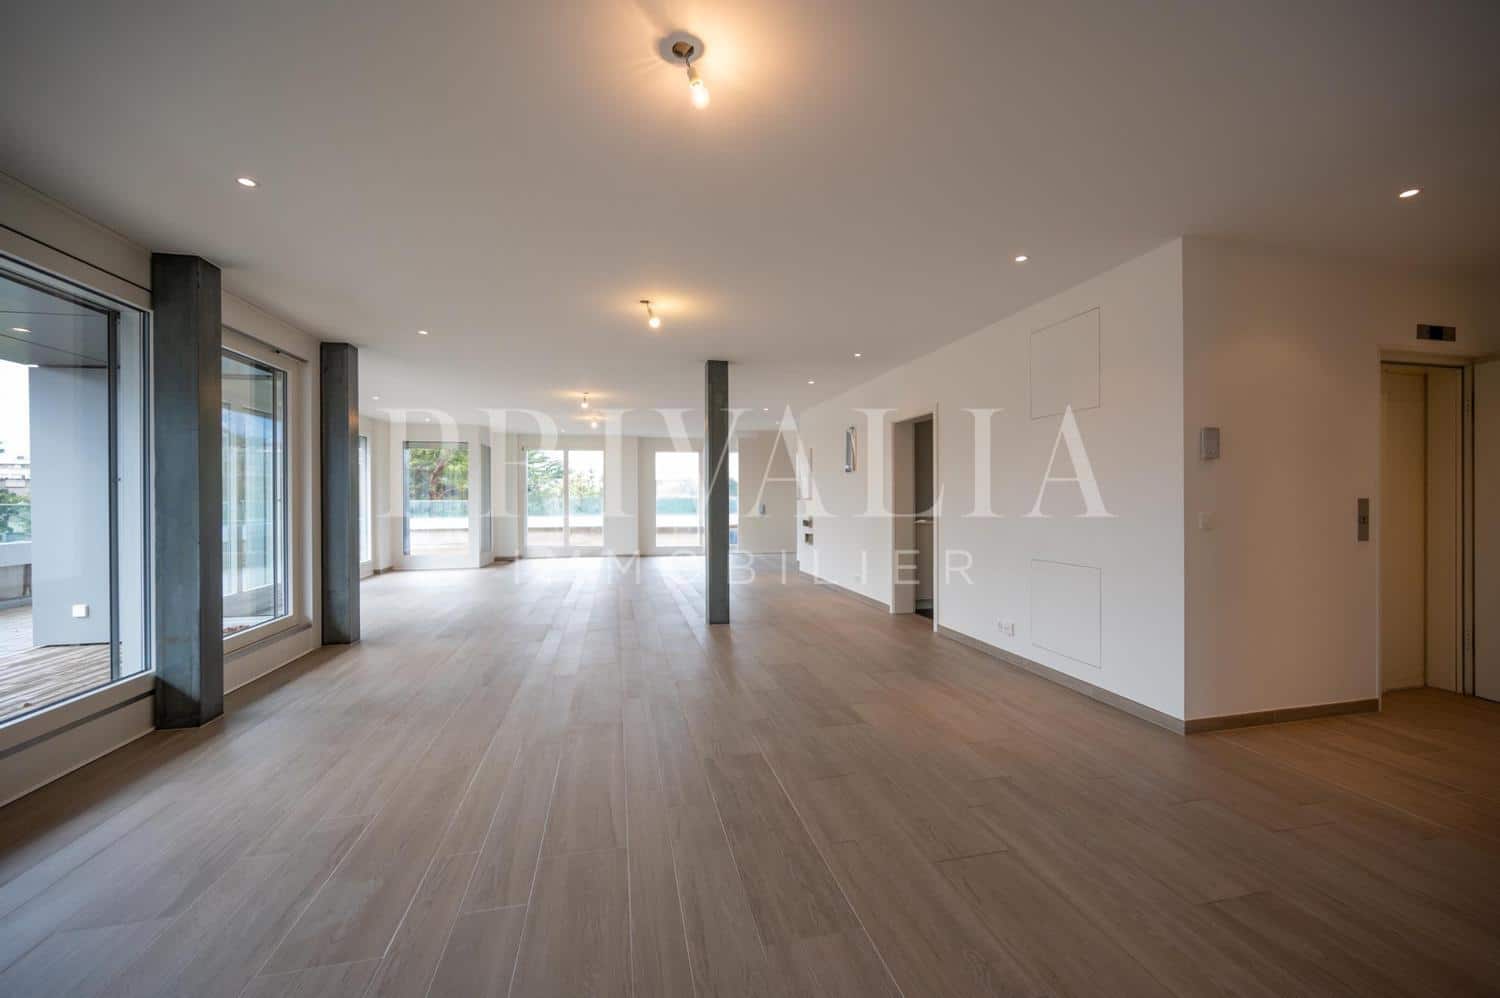 PrivaliaSuperb contemporary walk-through apartment in the heart of the sought-after residential district of Conches